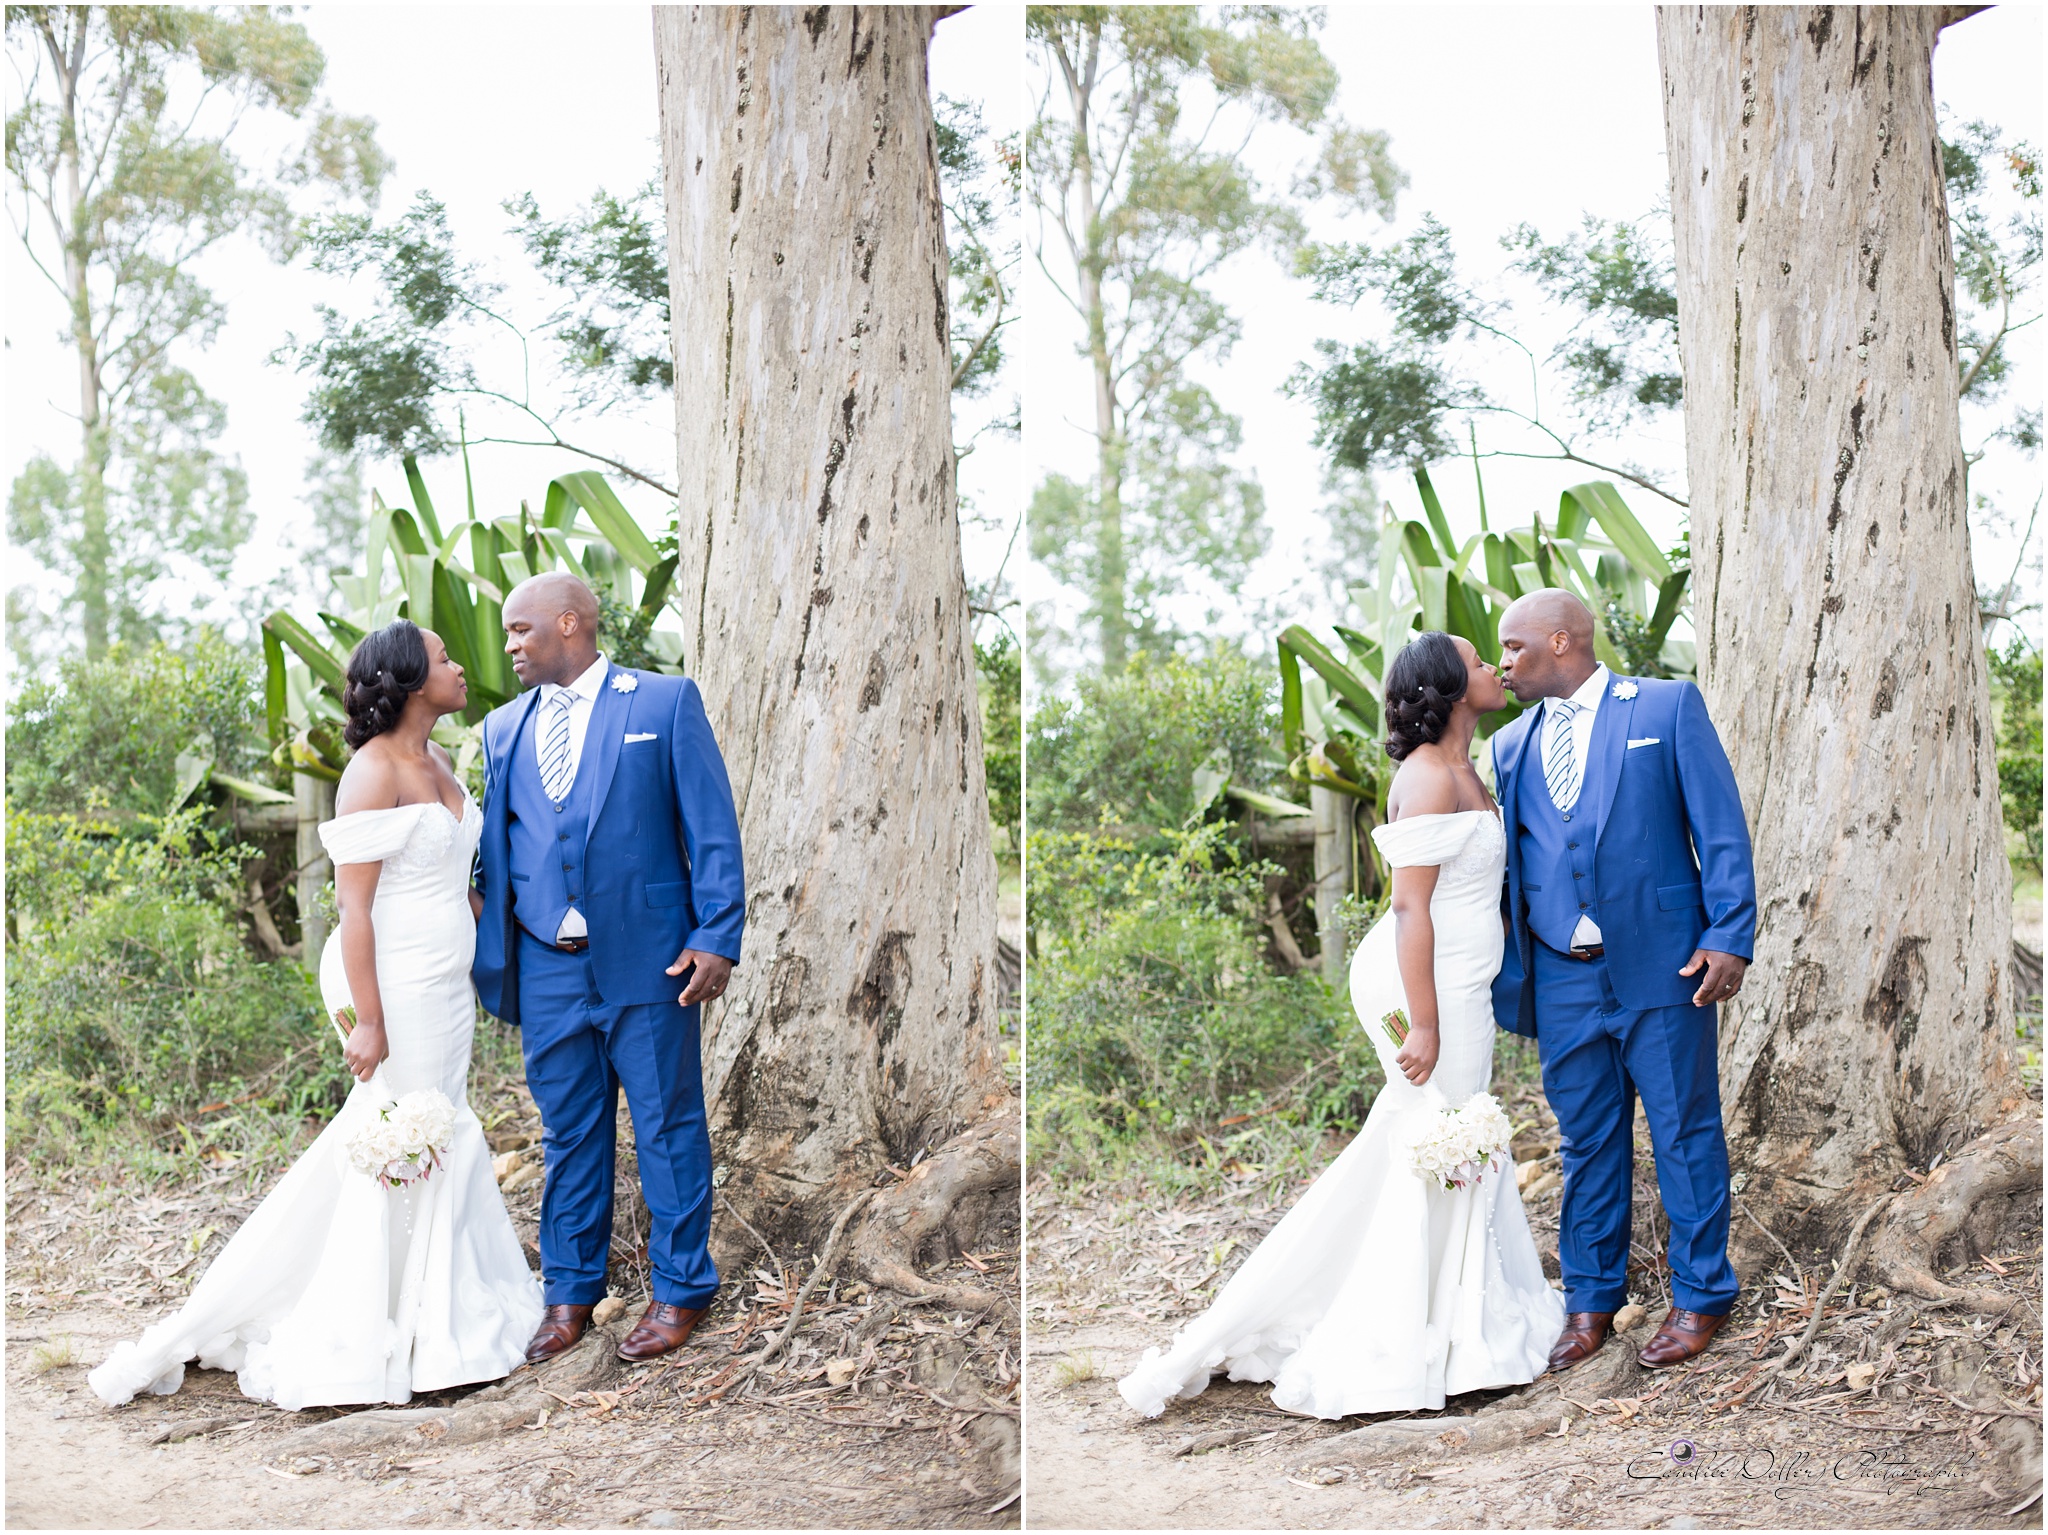 Thembi & Sabelo's Wedding - Candice Dollery Photography_8316